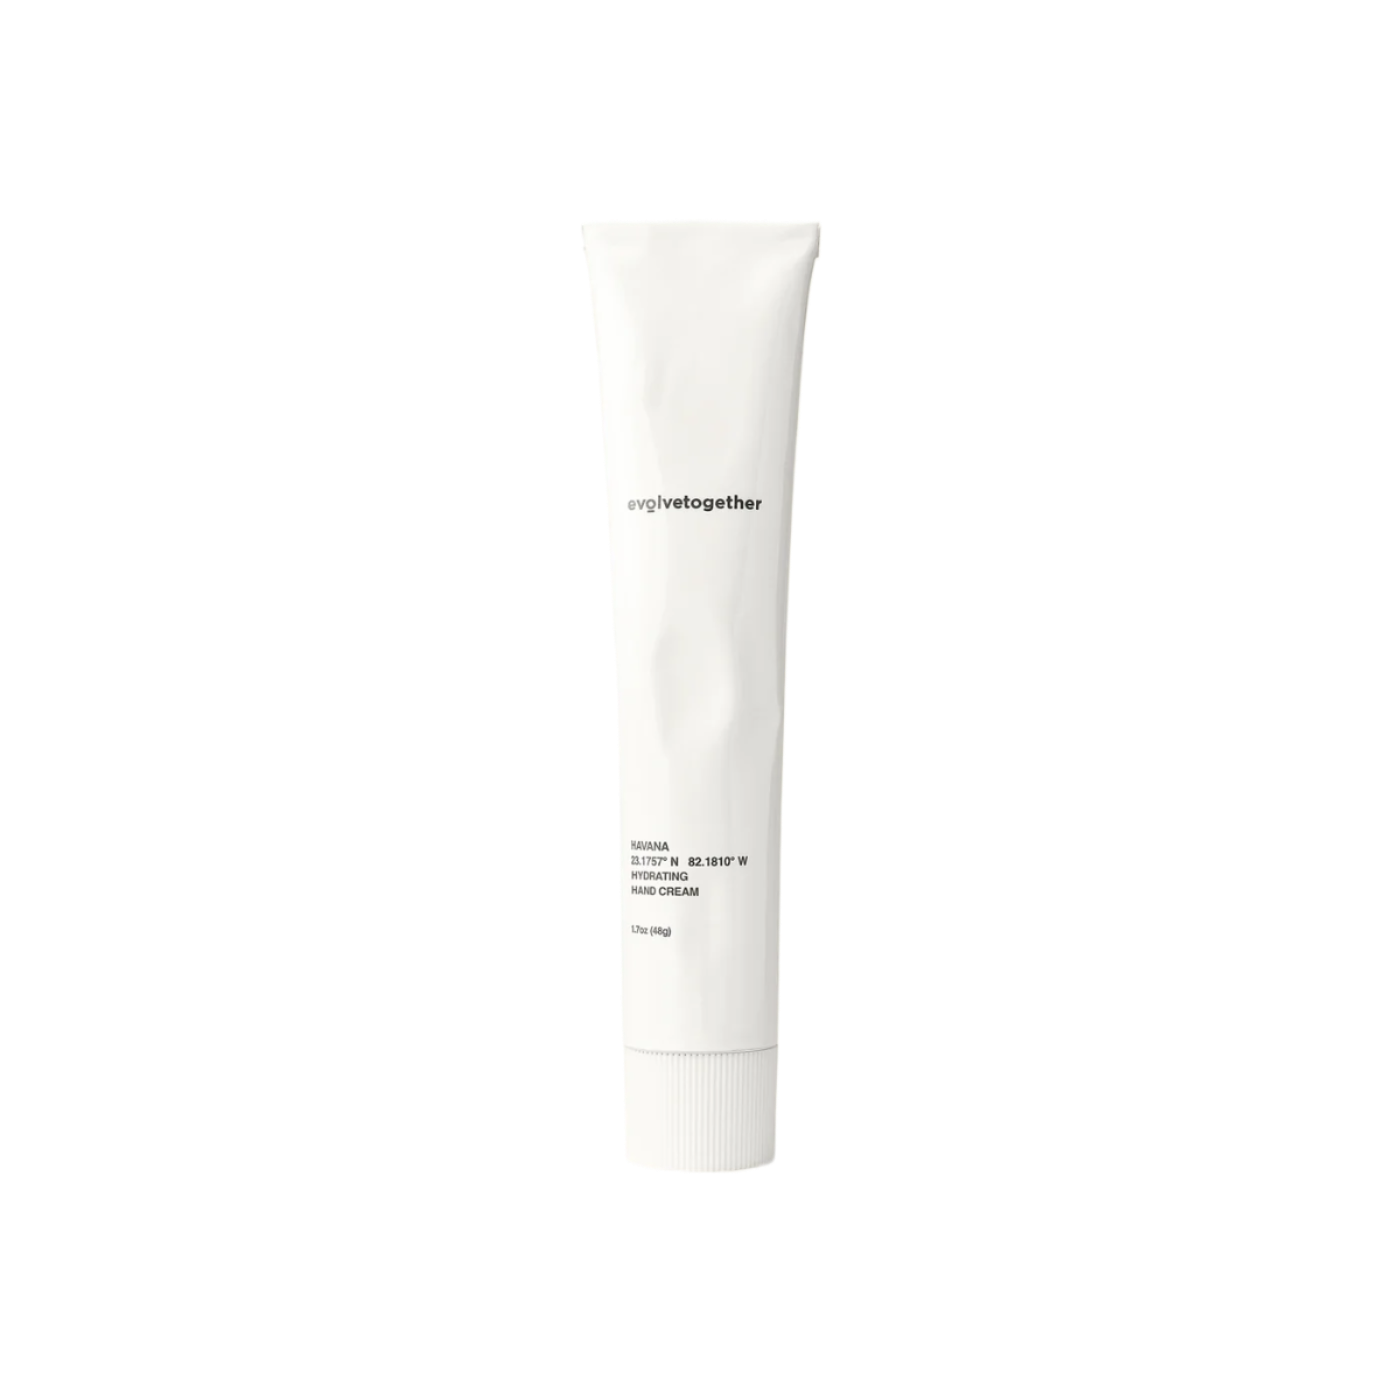 Load image into Gallery viewer, evolvetogether Hydrating Hand Cream
